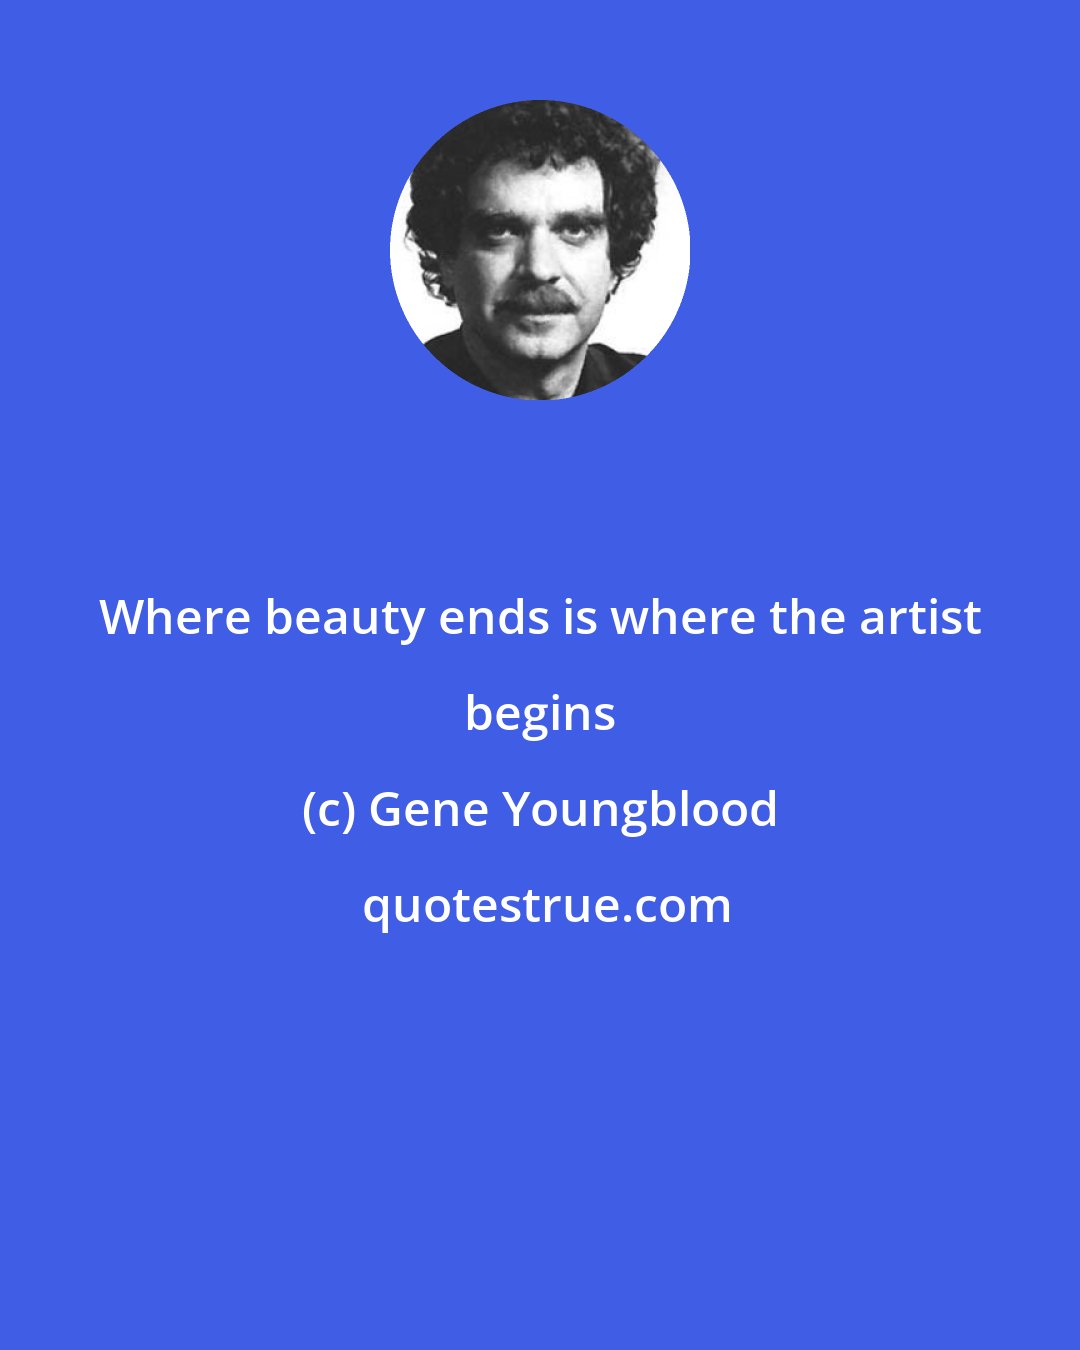 Gene Youngblood: Where beauty ends is where the artist begins